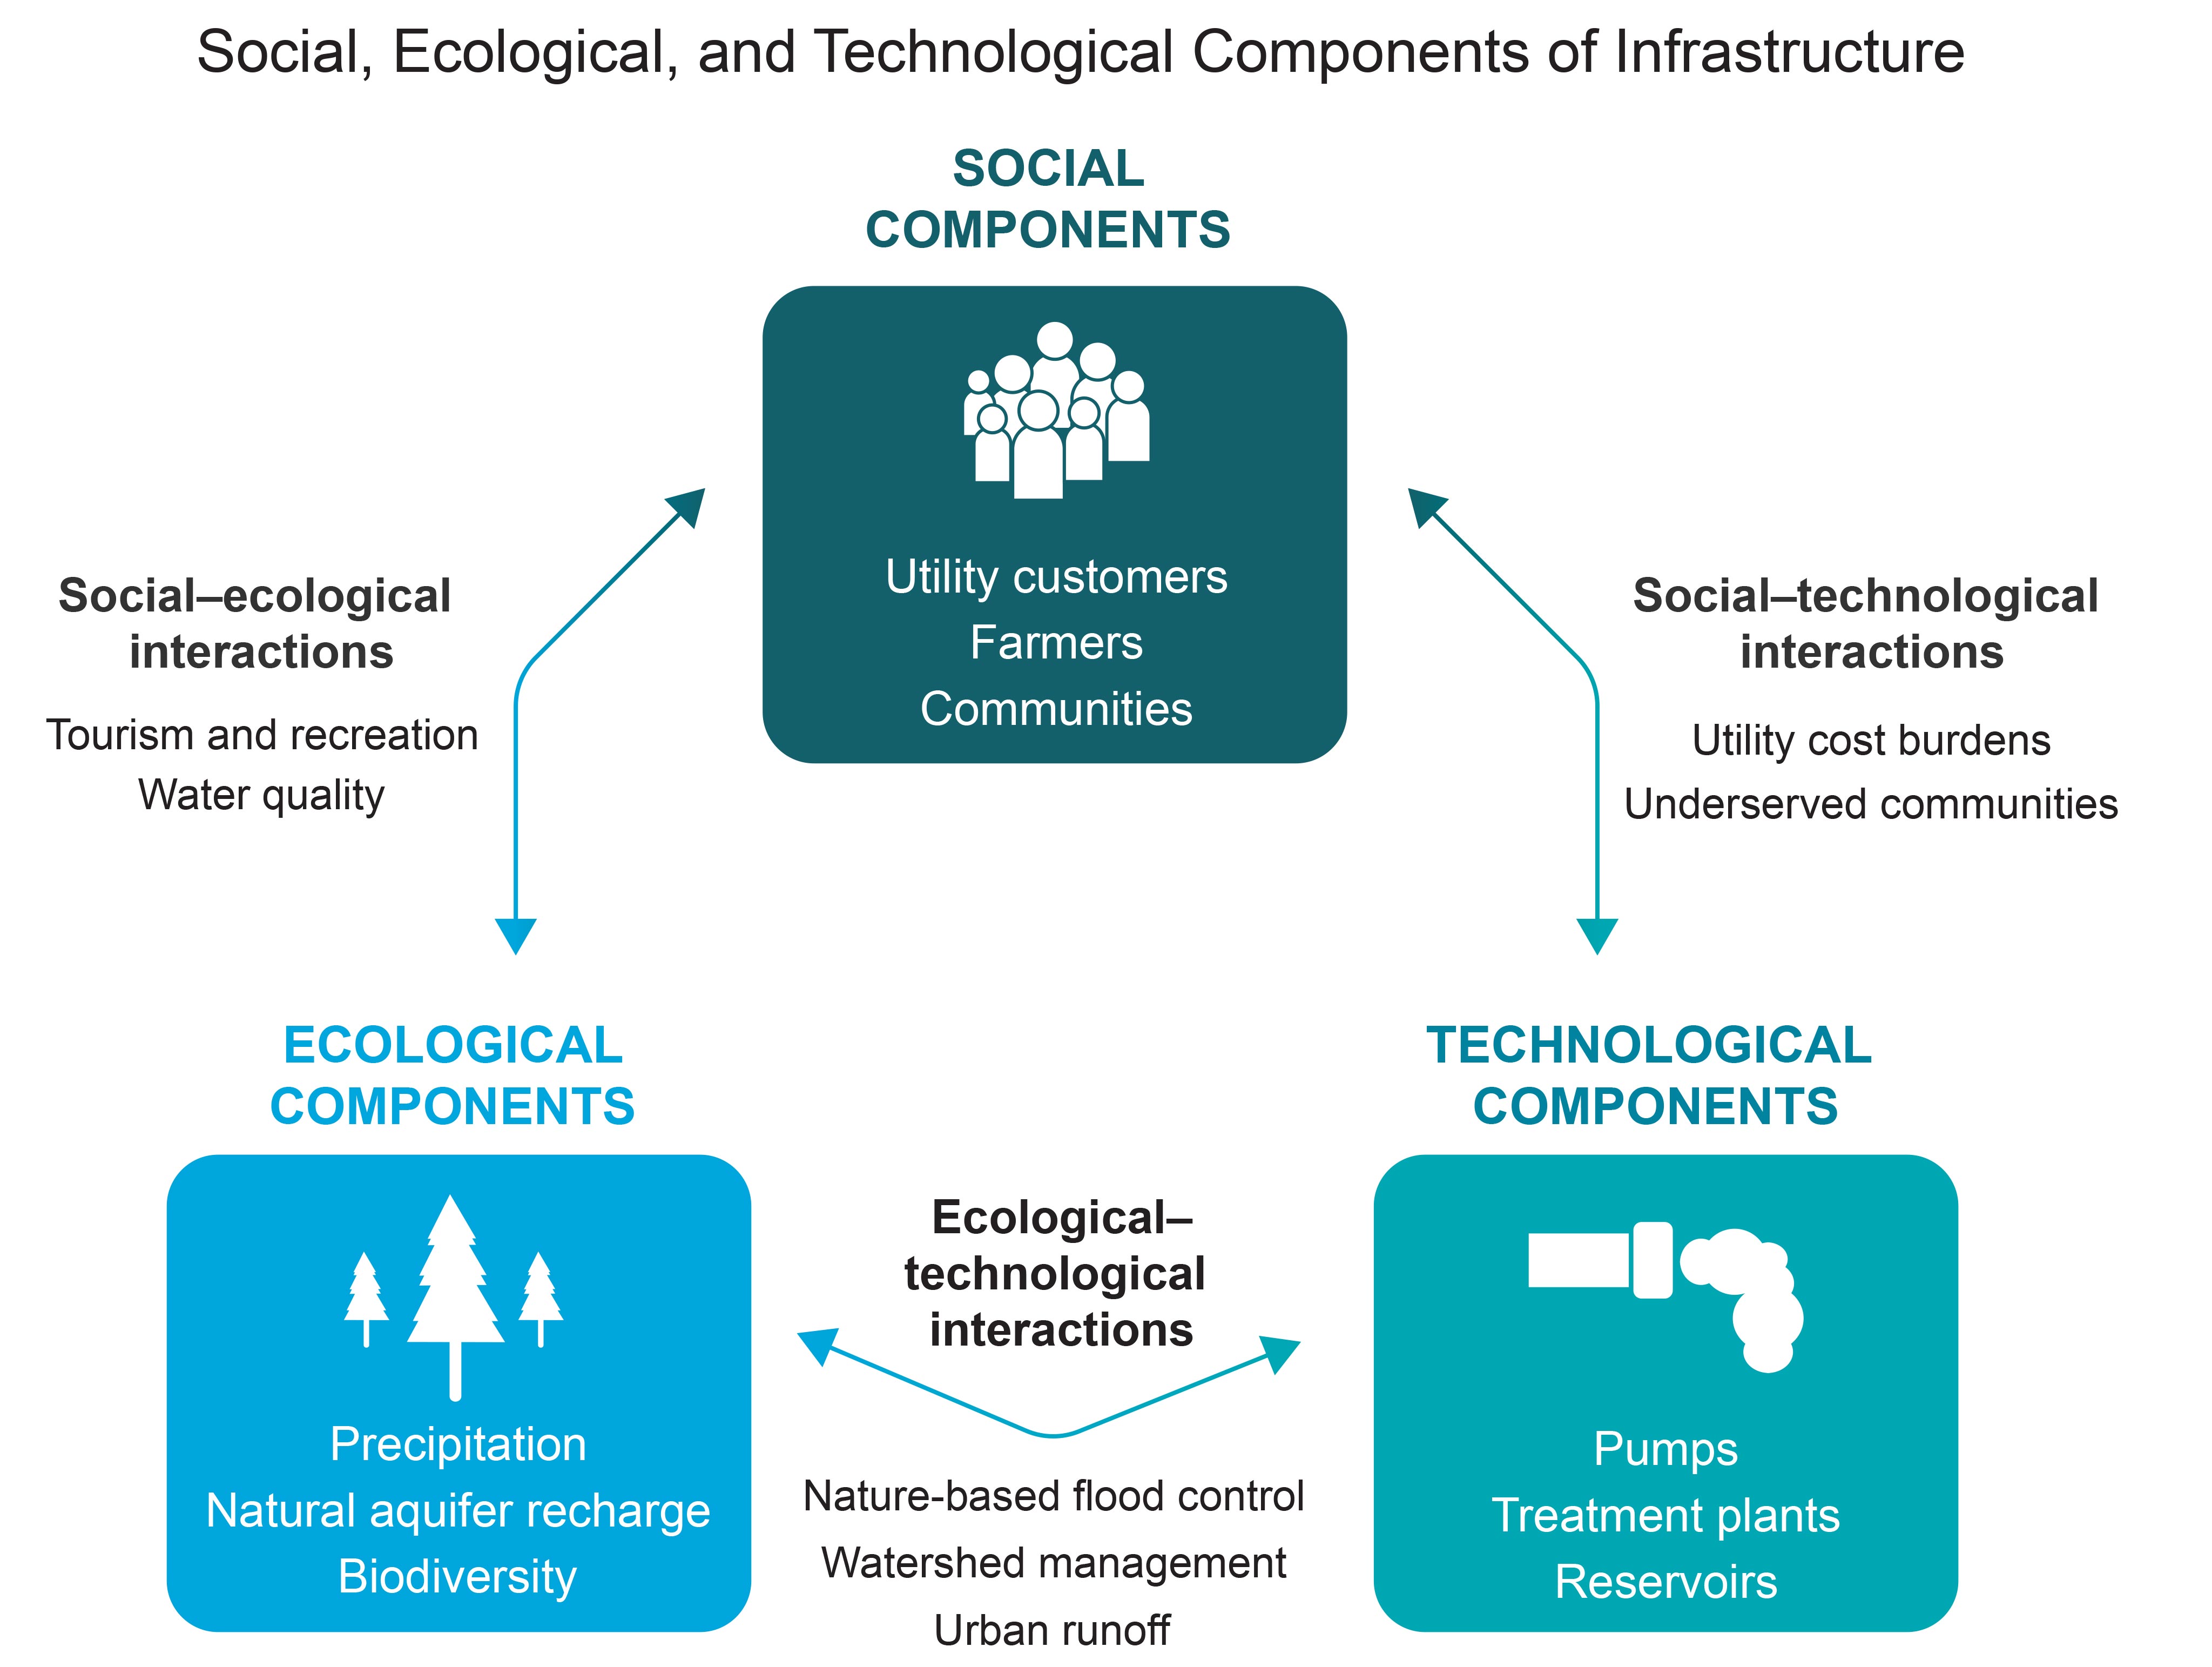 Social, Ecological, and Technological Components of Infrastructure